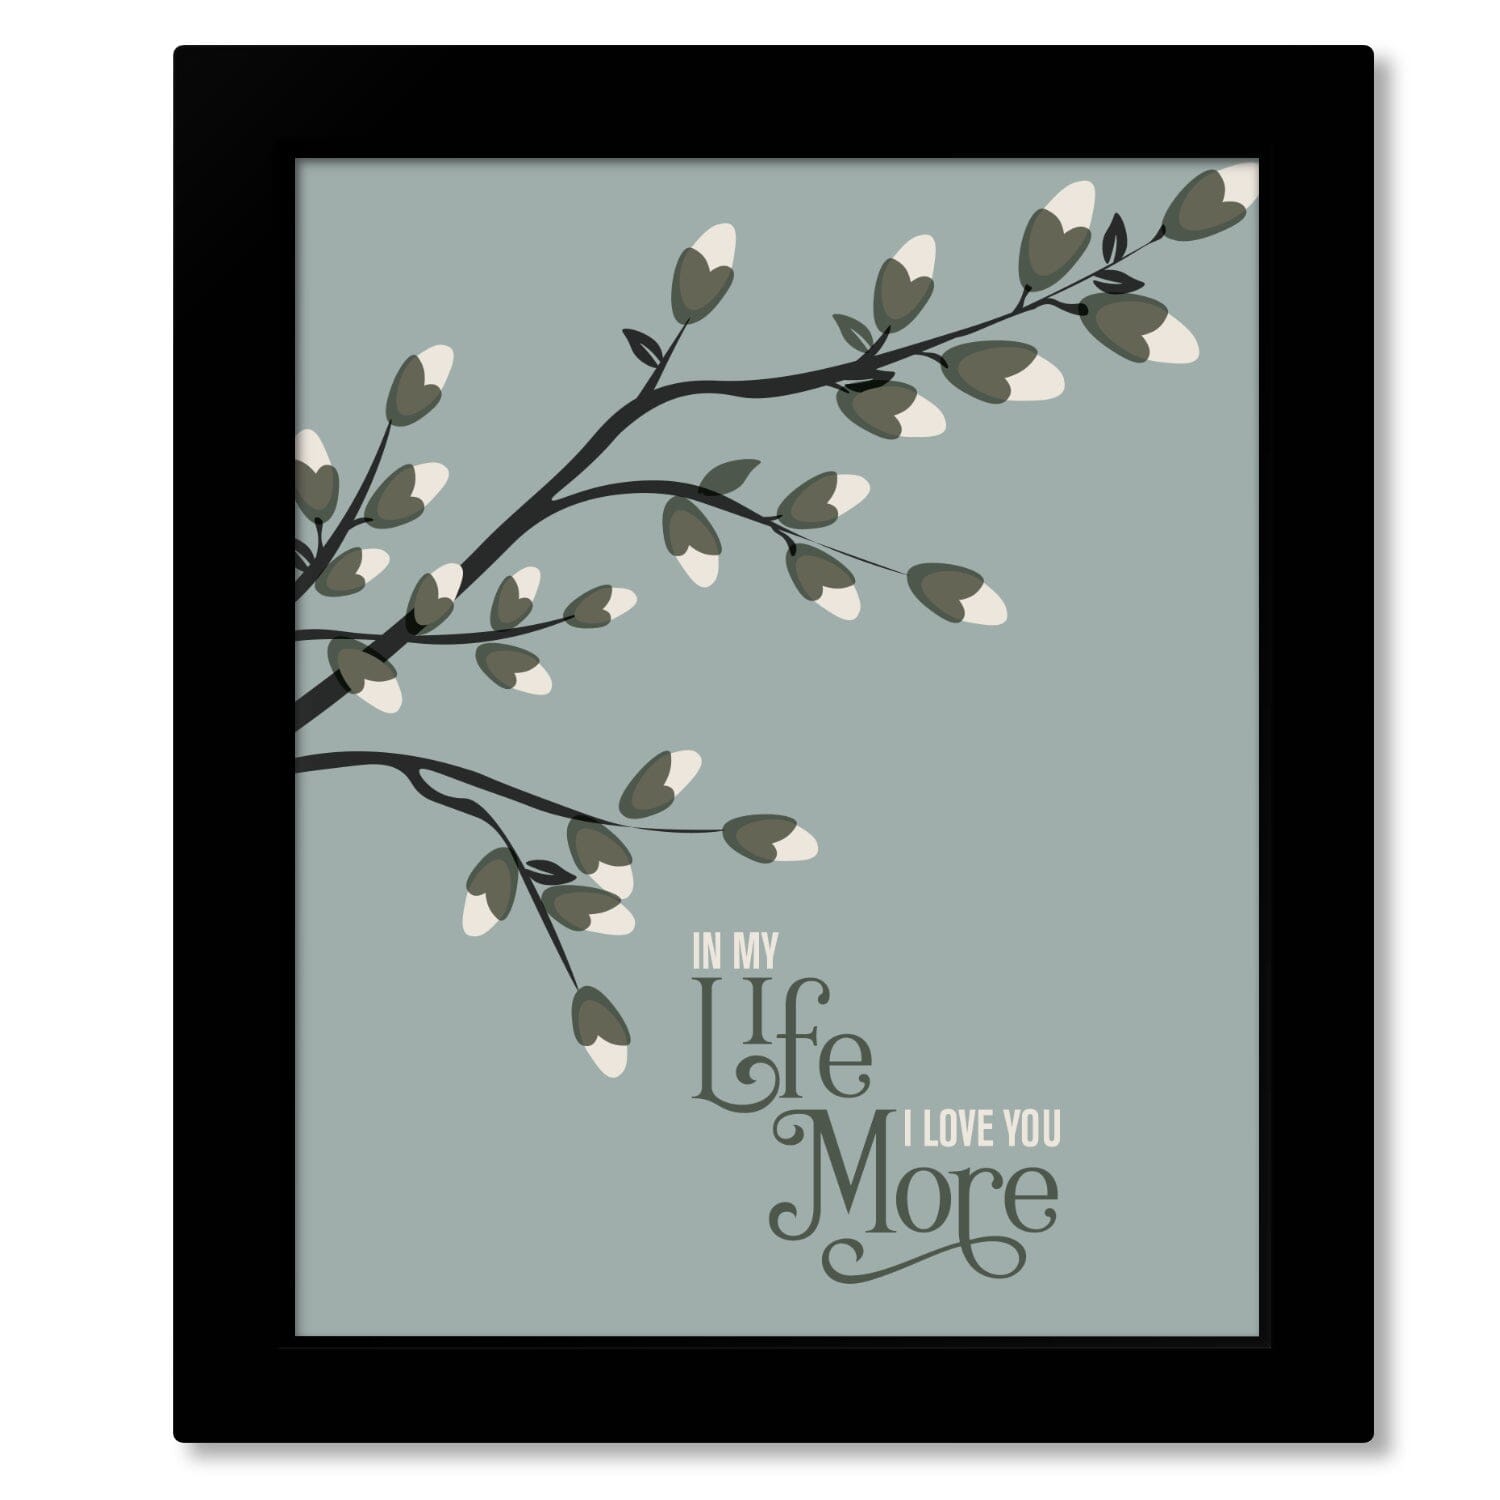 In My Life by the Beatles - Music Print Song Lyric Art Song Lyrics Art Song Lyrics Art 8x10 Framed Print (without mat) 